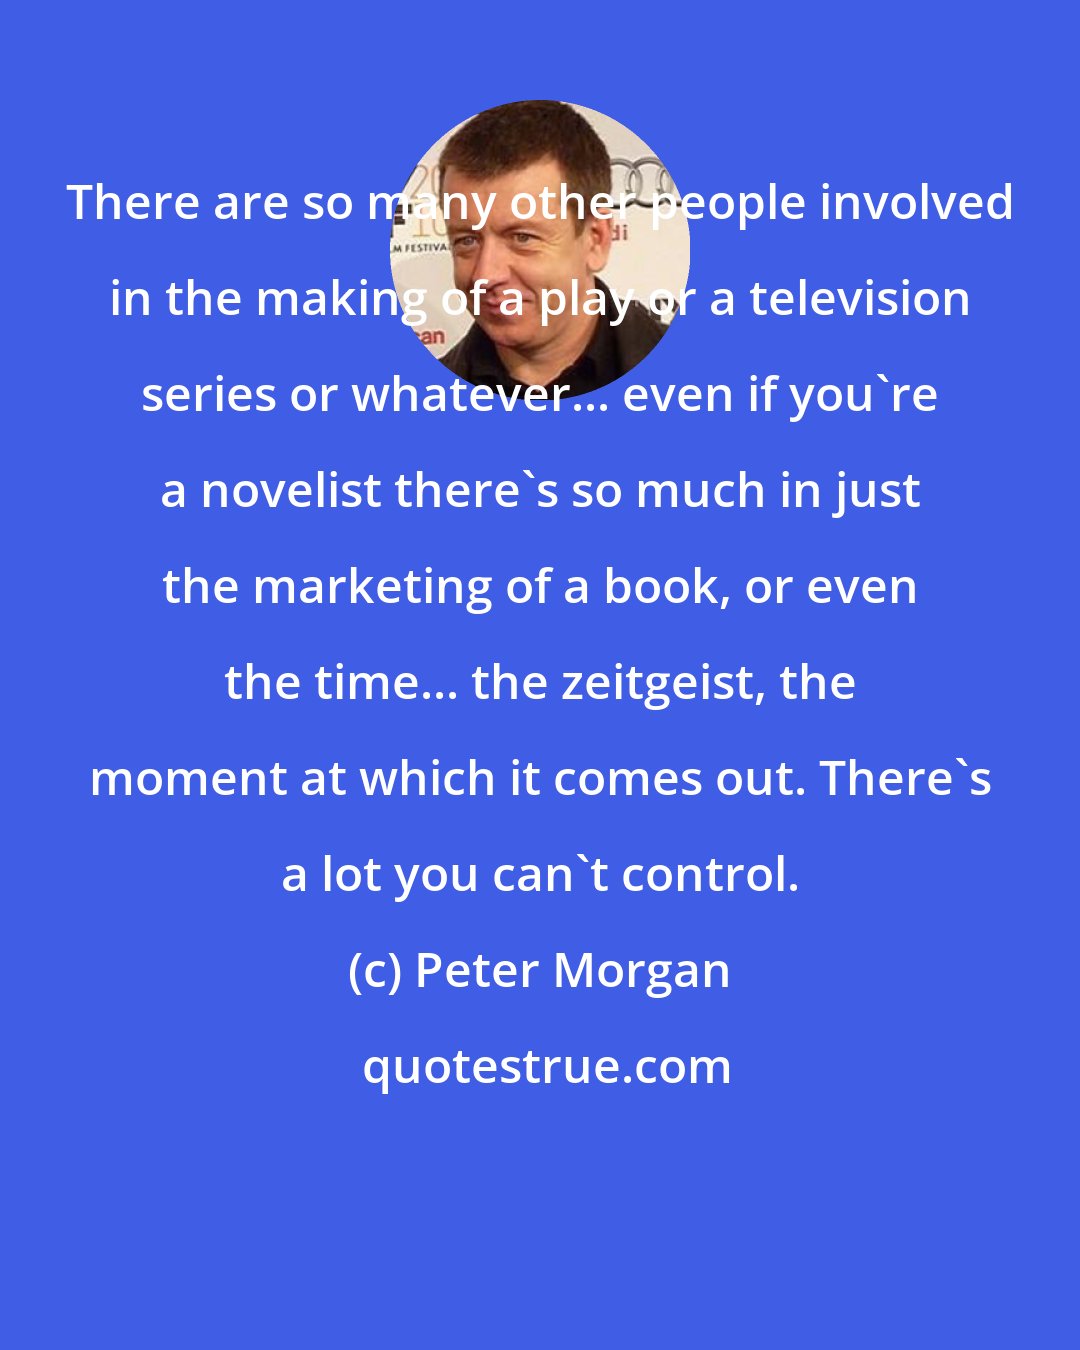 Peter Morgan: There are so many other people involved in the making of a play or a television series or whatever... even if you're a novelist there's so much in just the marketing of a book, or even the time... the zeitgeist, the moment at which it comes out. There's a lot you can't control.